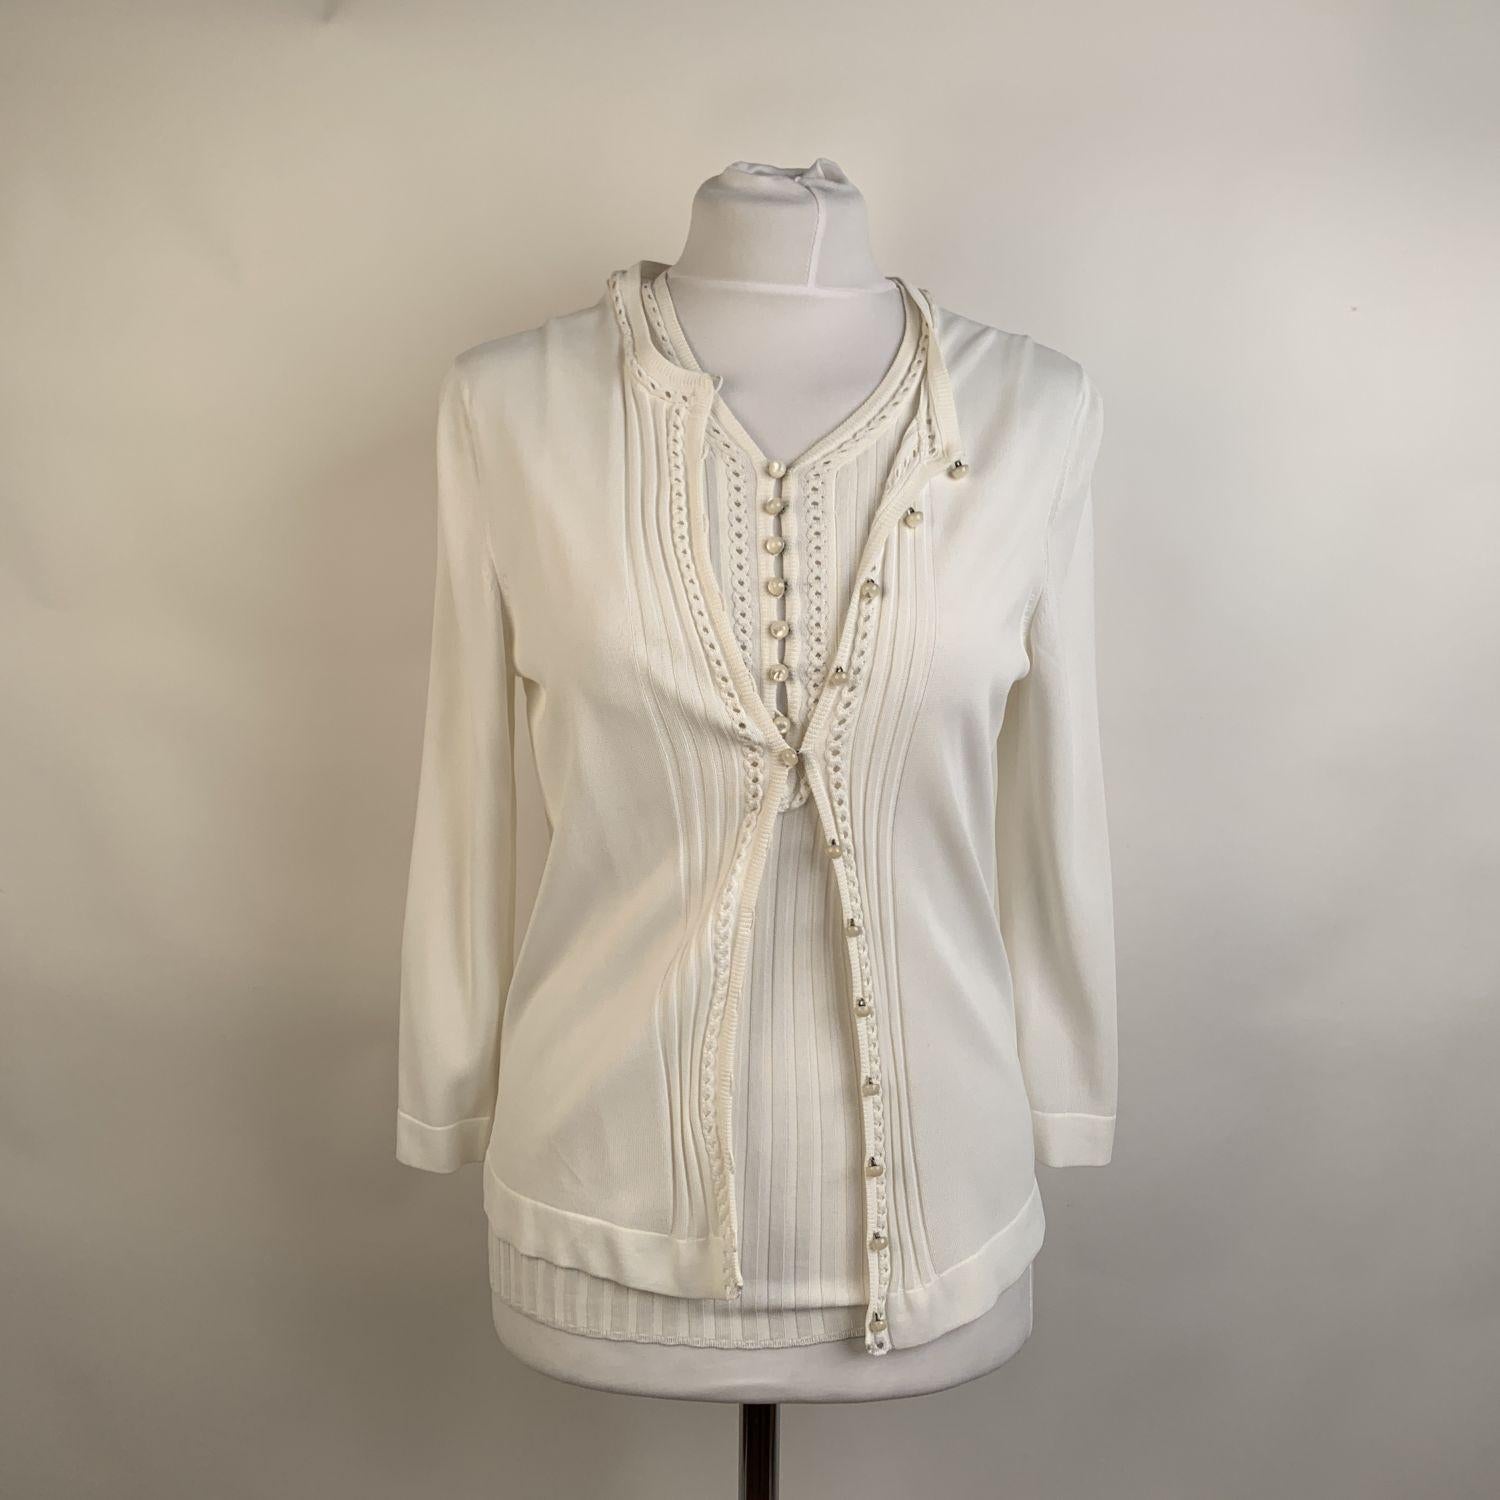 Hermes Twin Set in white color. The cardigan has a front closure with lovely pearl-look buttons. The matching sleeveless top features a button placket on the front, Y neckline and a ribbed hem. Composition: 100% Viscose. Made in Italy. SIZE: 38 FR